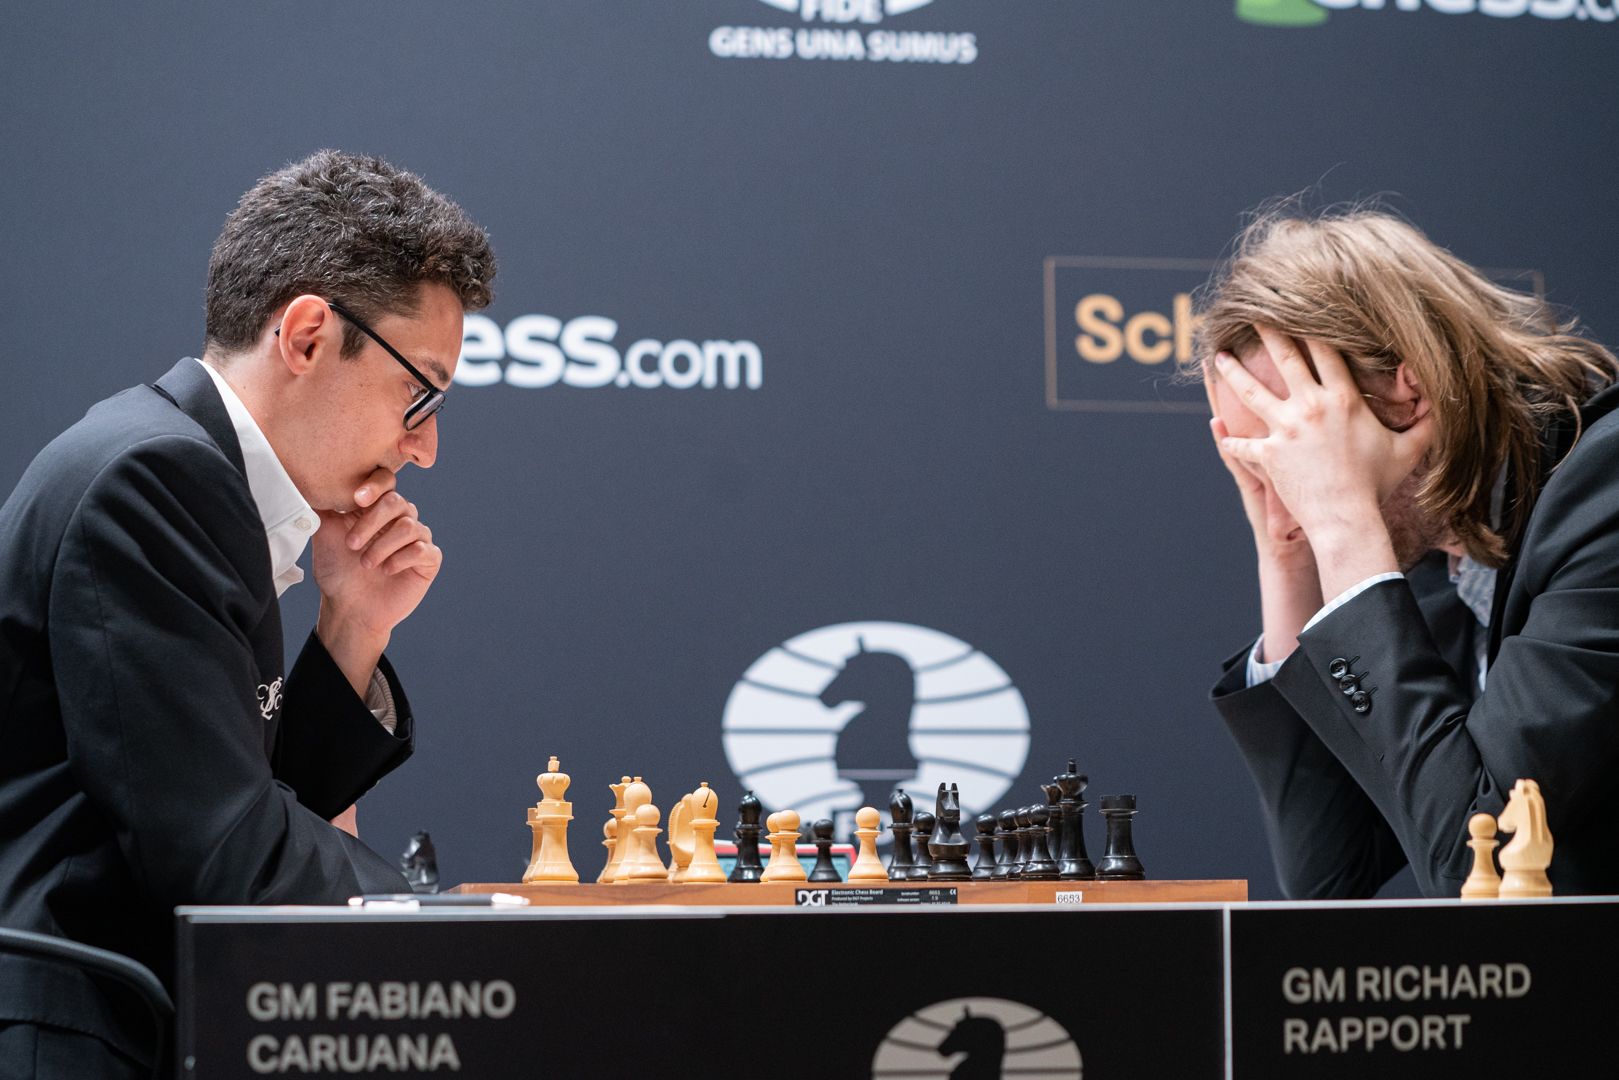 Nepomniachtchi and Caruana Won In Round 6 of the Candidates 2022